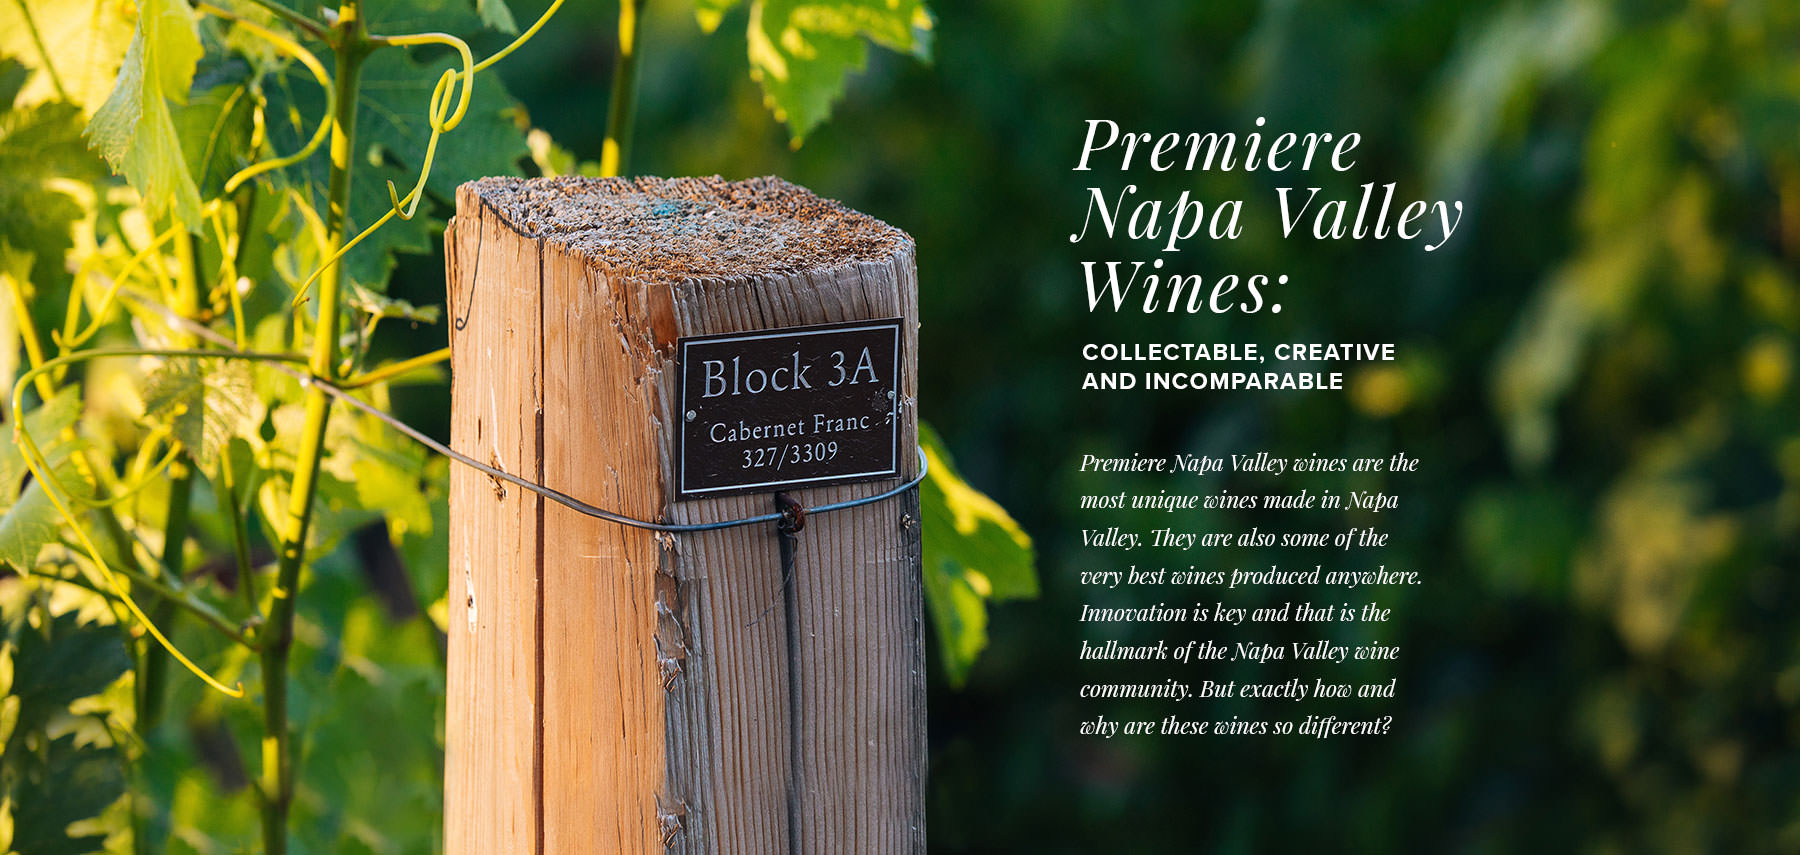 Premiere Napa Valley Wines: collectable, creative and incomparable